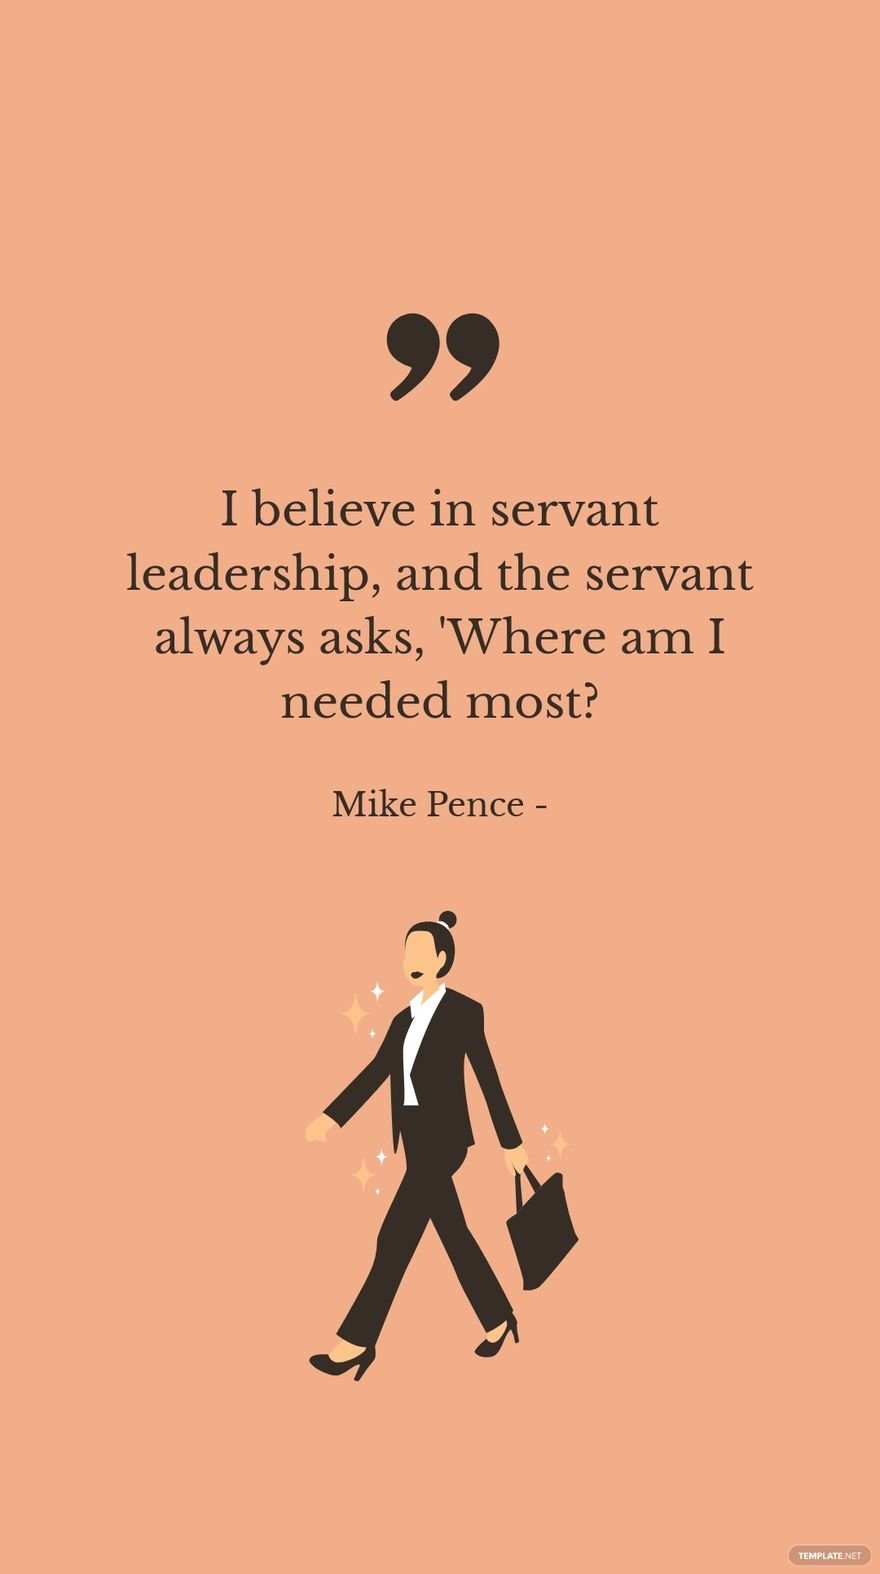 Free Mike Pence - I believe in servant leadership, and the servant always asks, 'Where am I needed most? in JPG